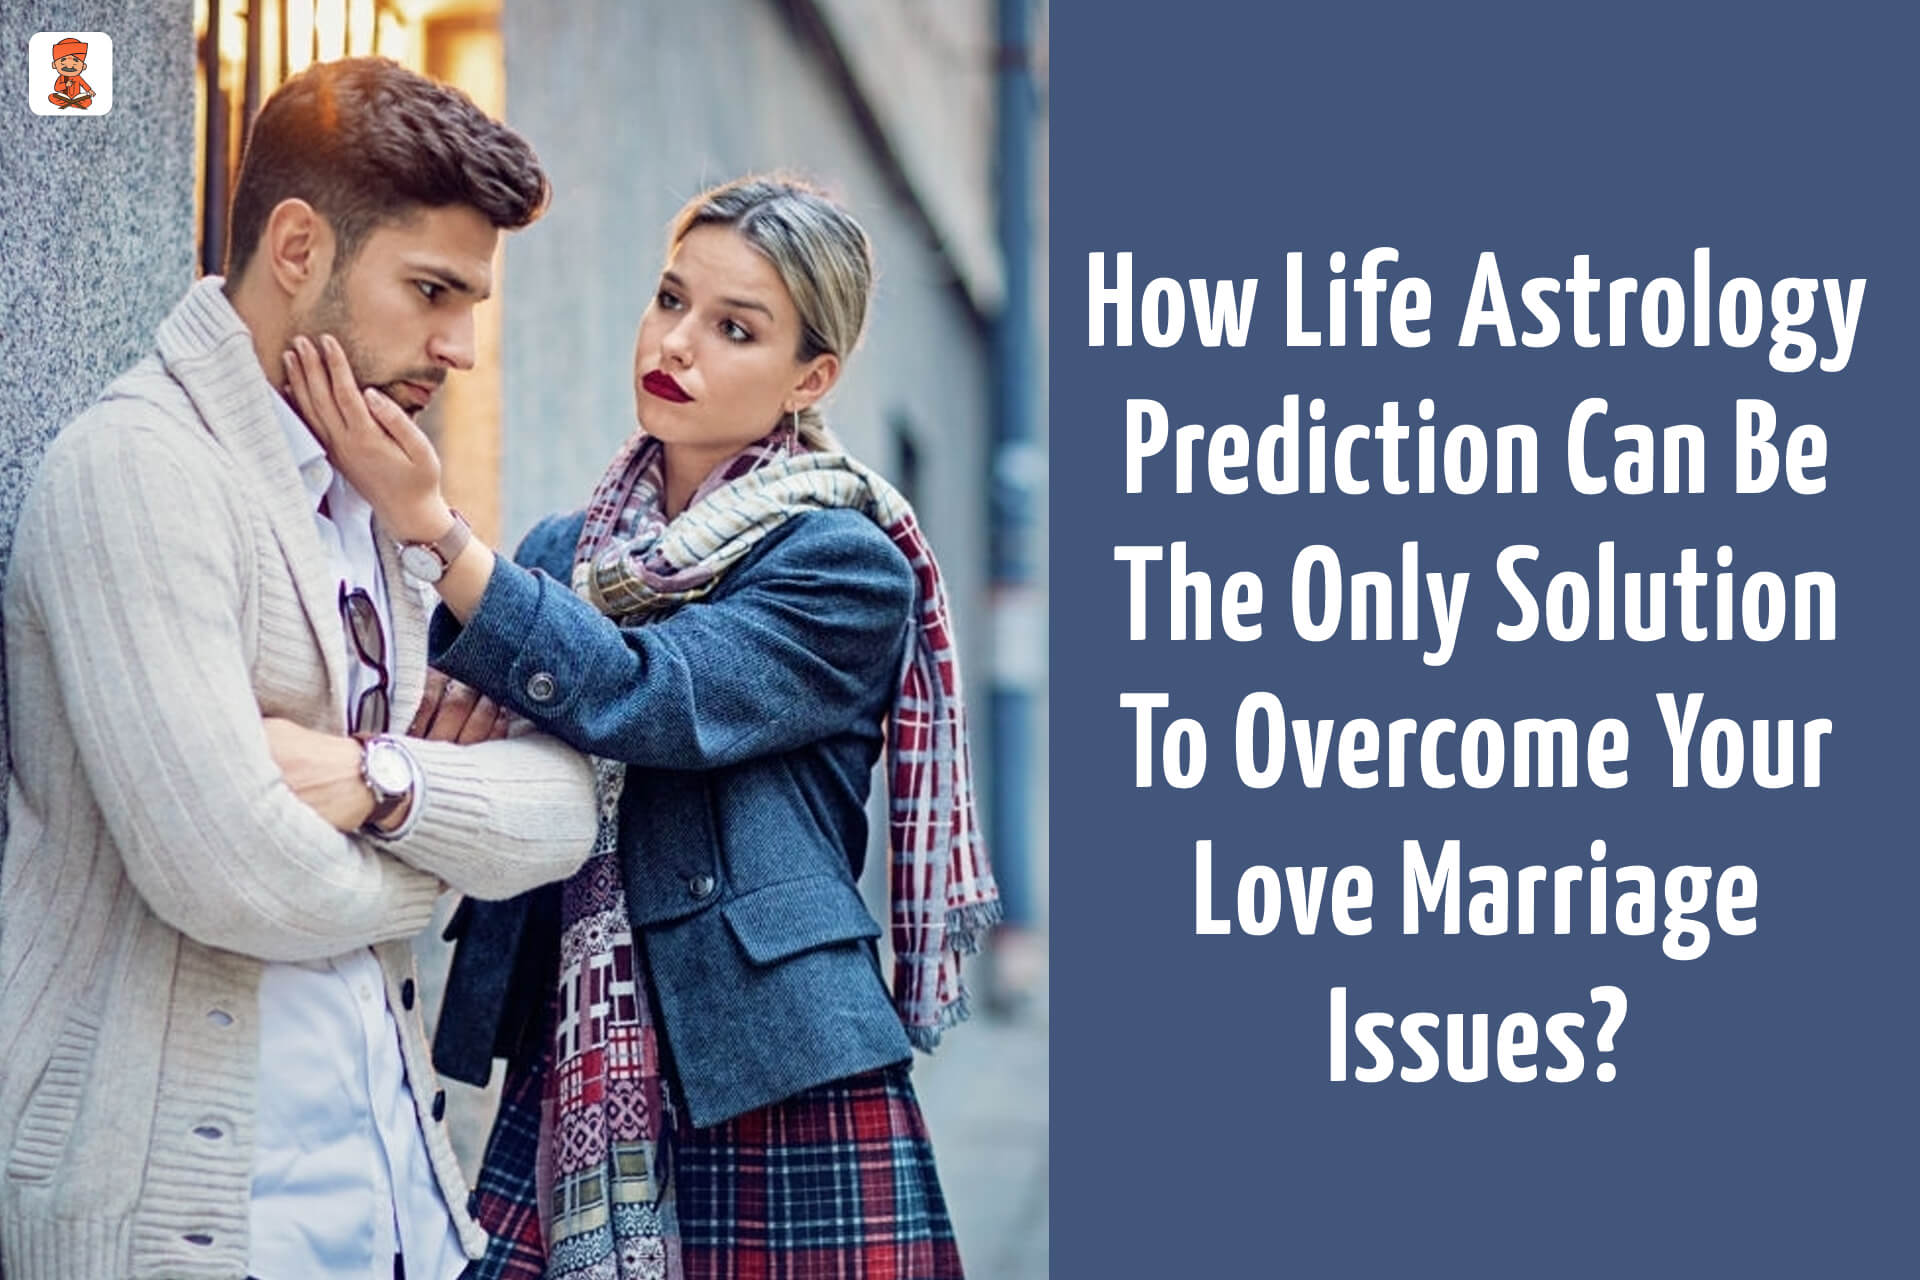 How Life Astrology Prediction Can Be The Solution For Marriage Issues?